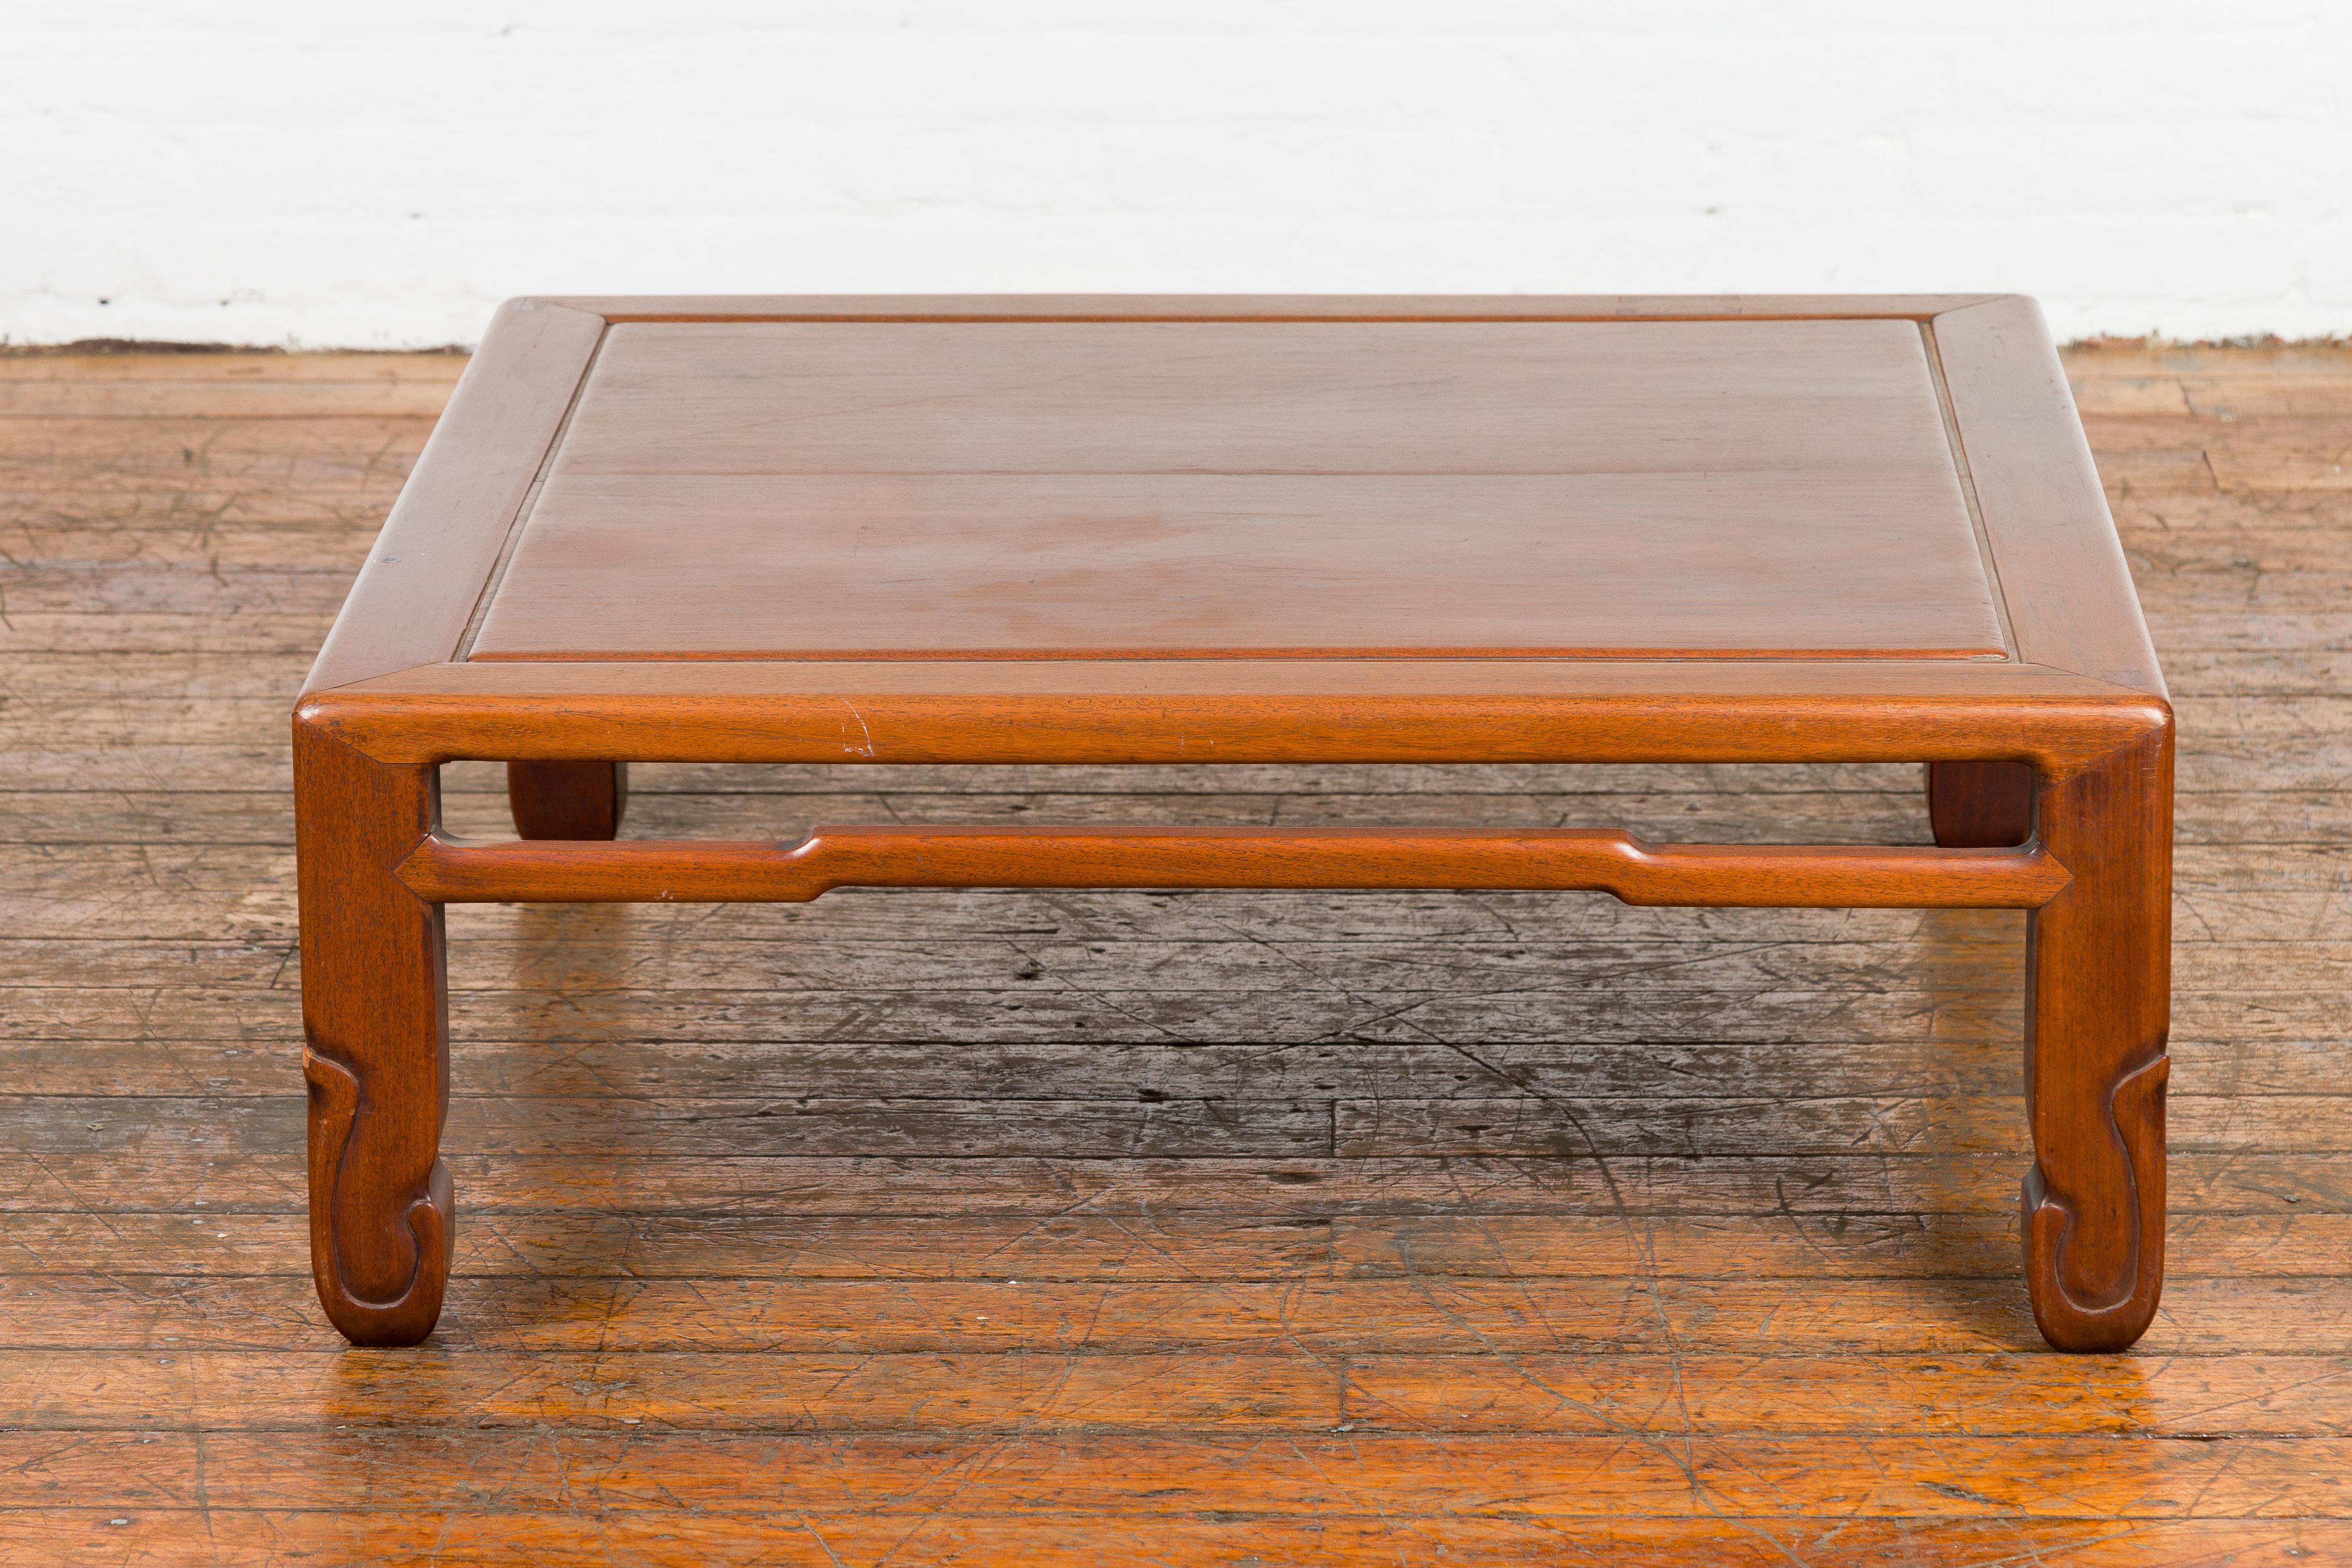 Chinese 19th Century Low Kang Coffee Table with Humpback Stretcher and Horsehoof Feet For Sale